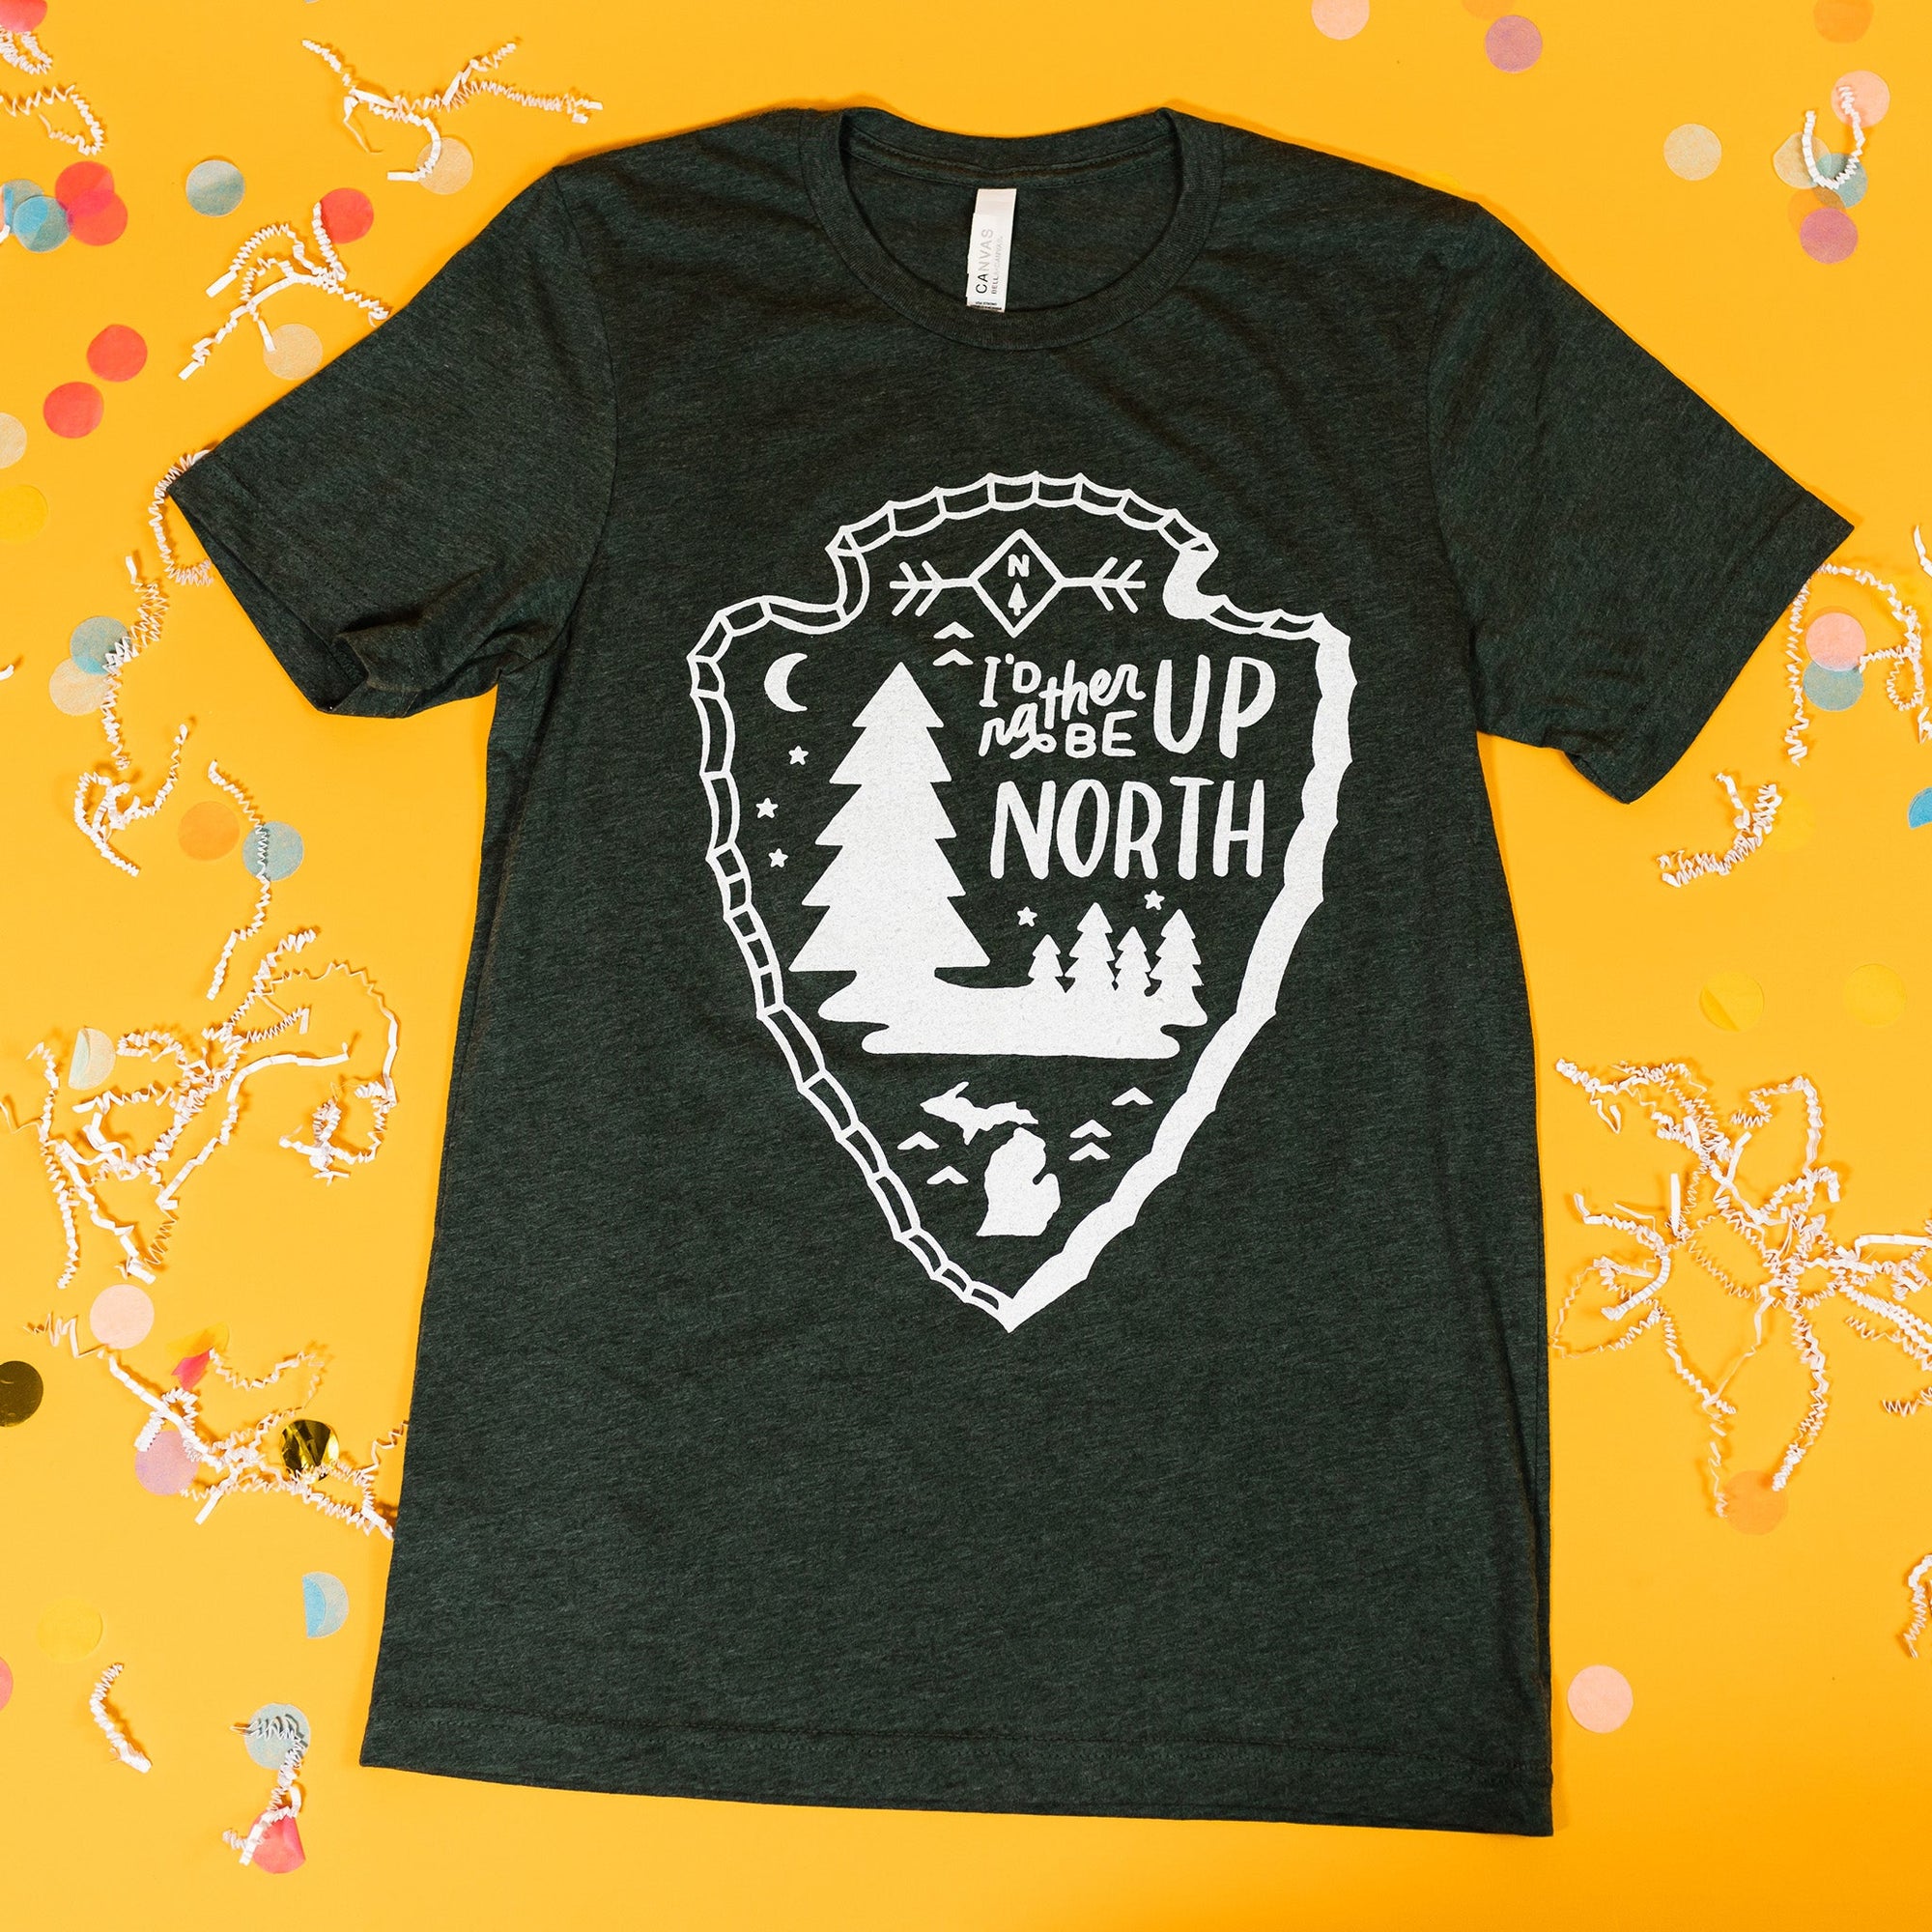 On a sunny mustard background sits a t-shirt with white crinkle and big, colorful confetti scattered around. This weathered forest green tee features hand-lettering and various custom illustrations enclosed by an arrowhead design in white and says "I'd rather be UP NORTH."